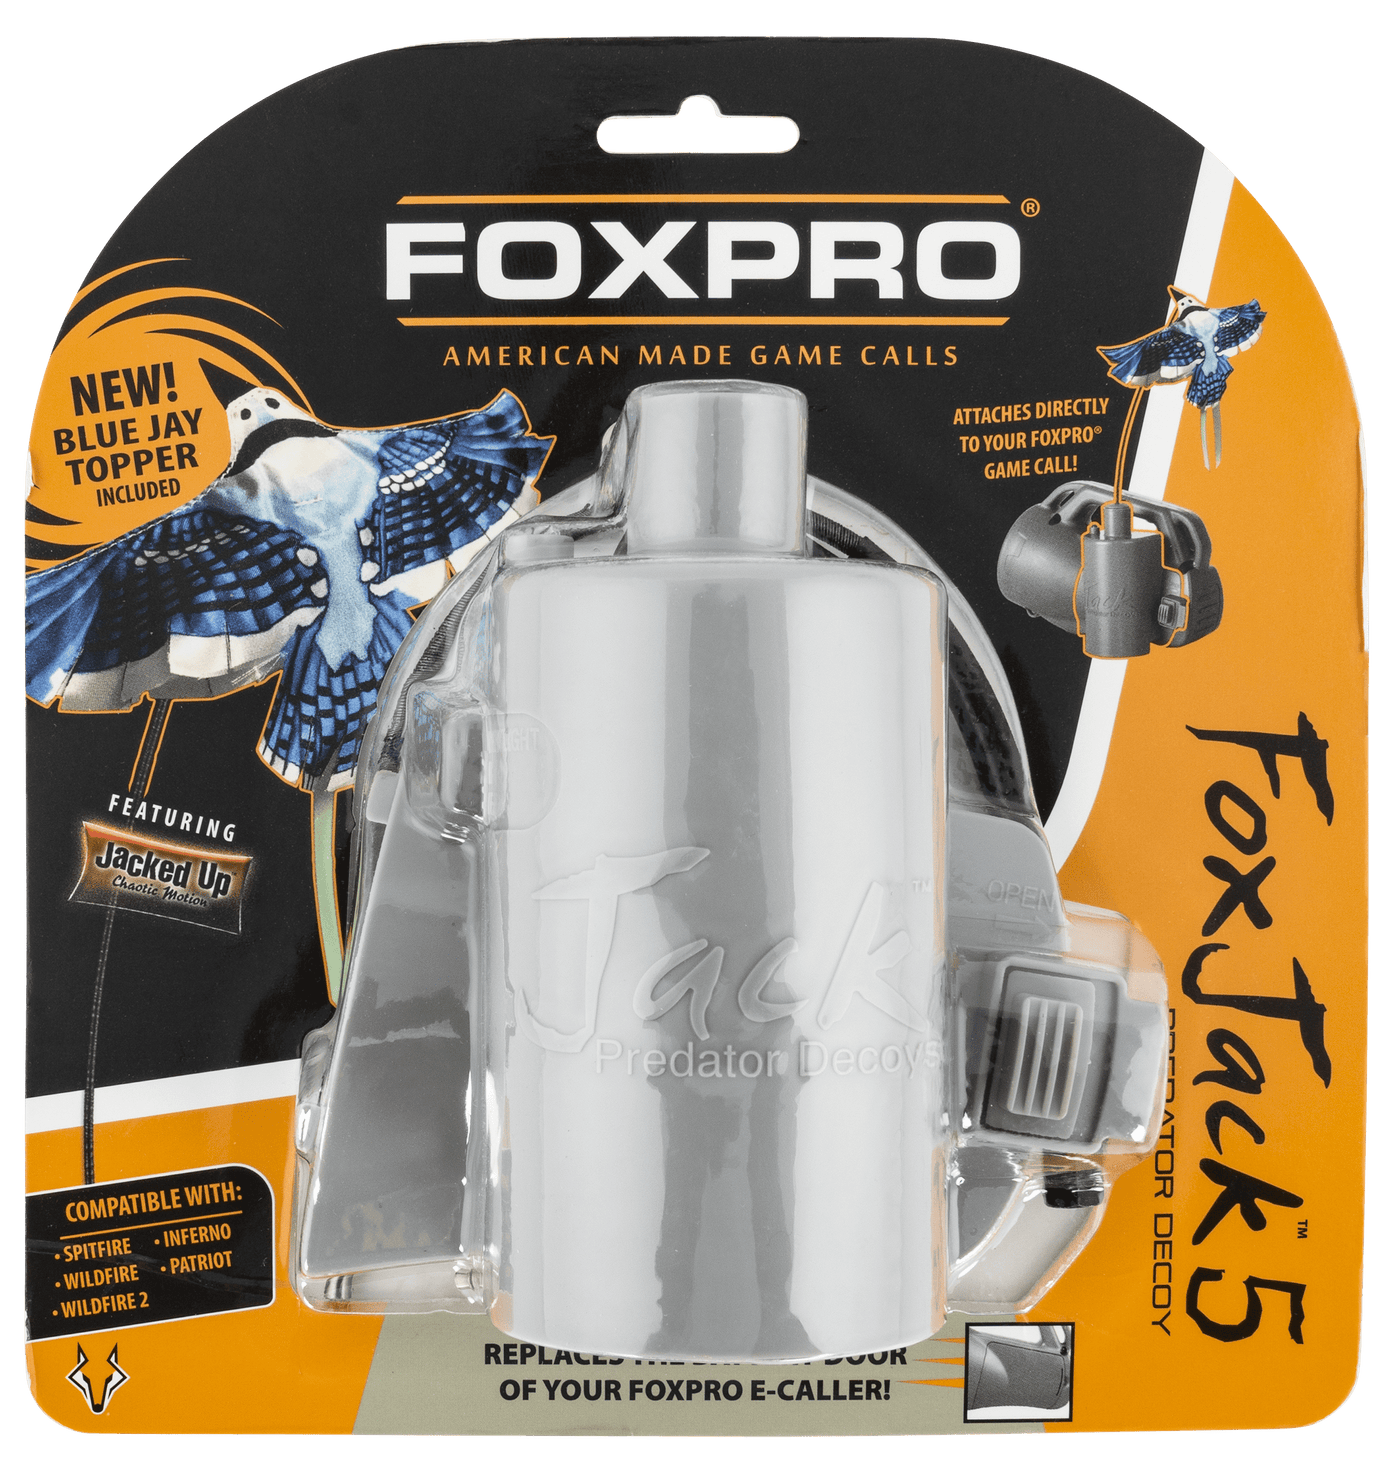 Foxpro Foxpro Foxjack 5, Foxpro  Foxjack 5  Foxjack 5 (blue Jay Topper) Hunting